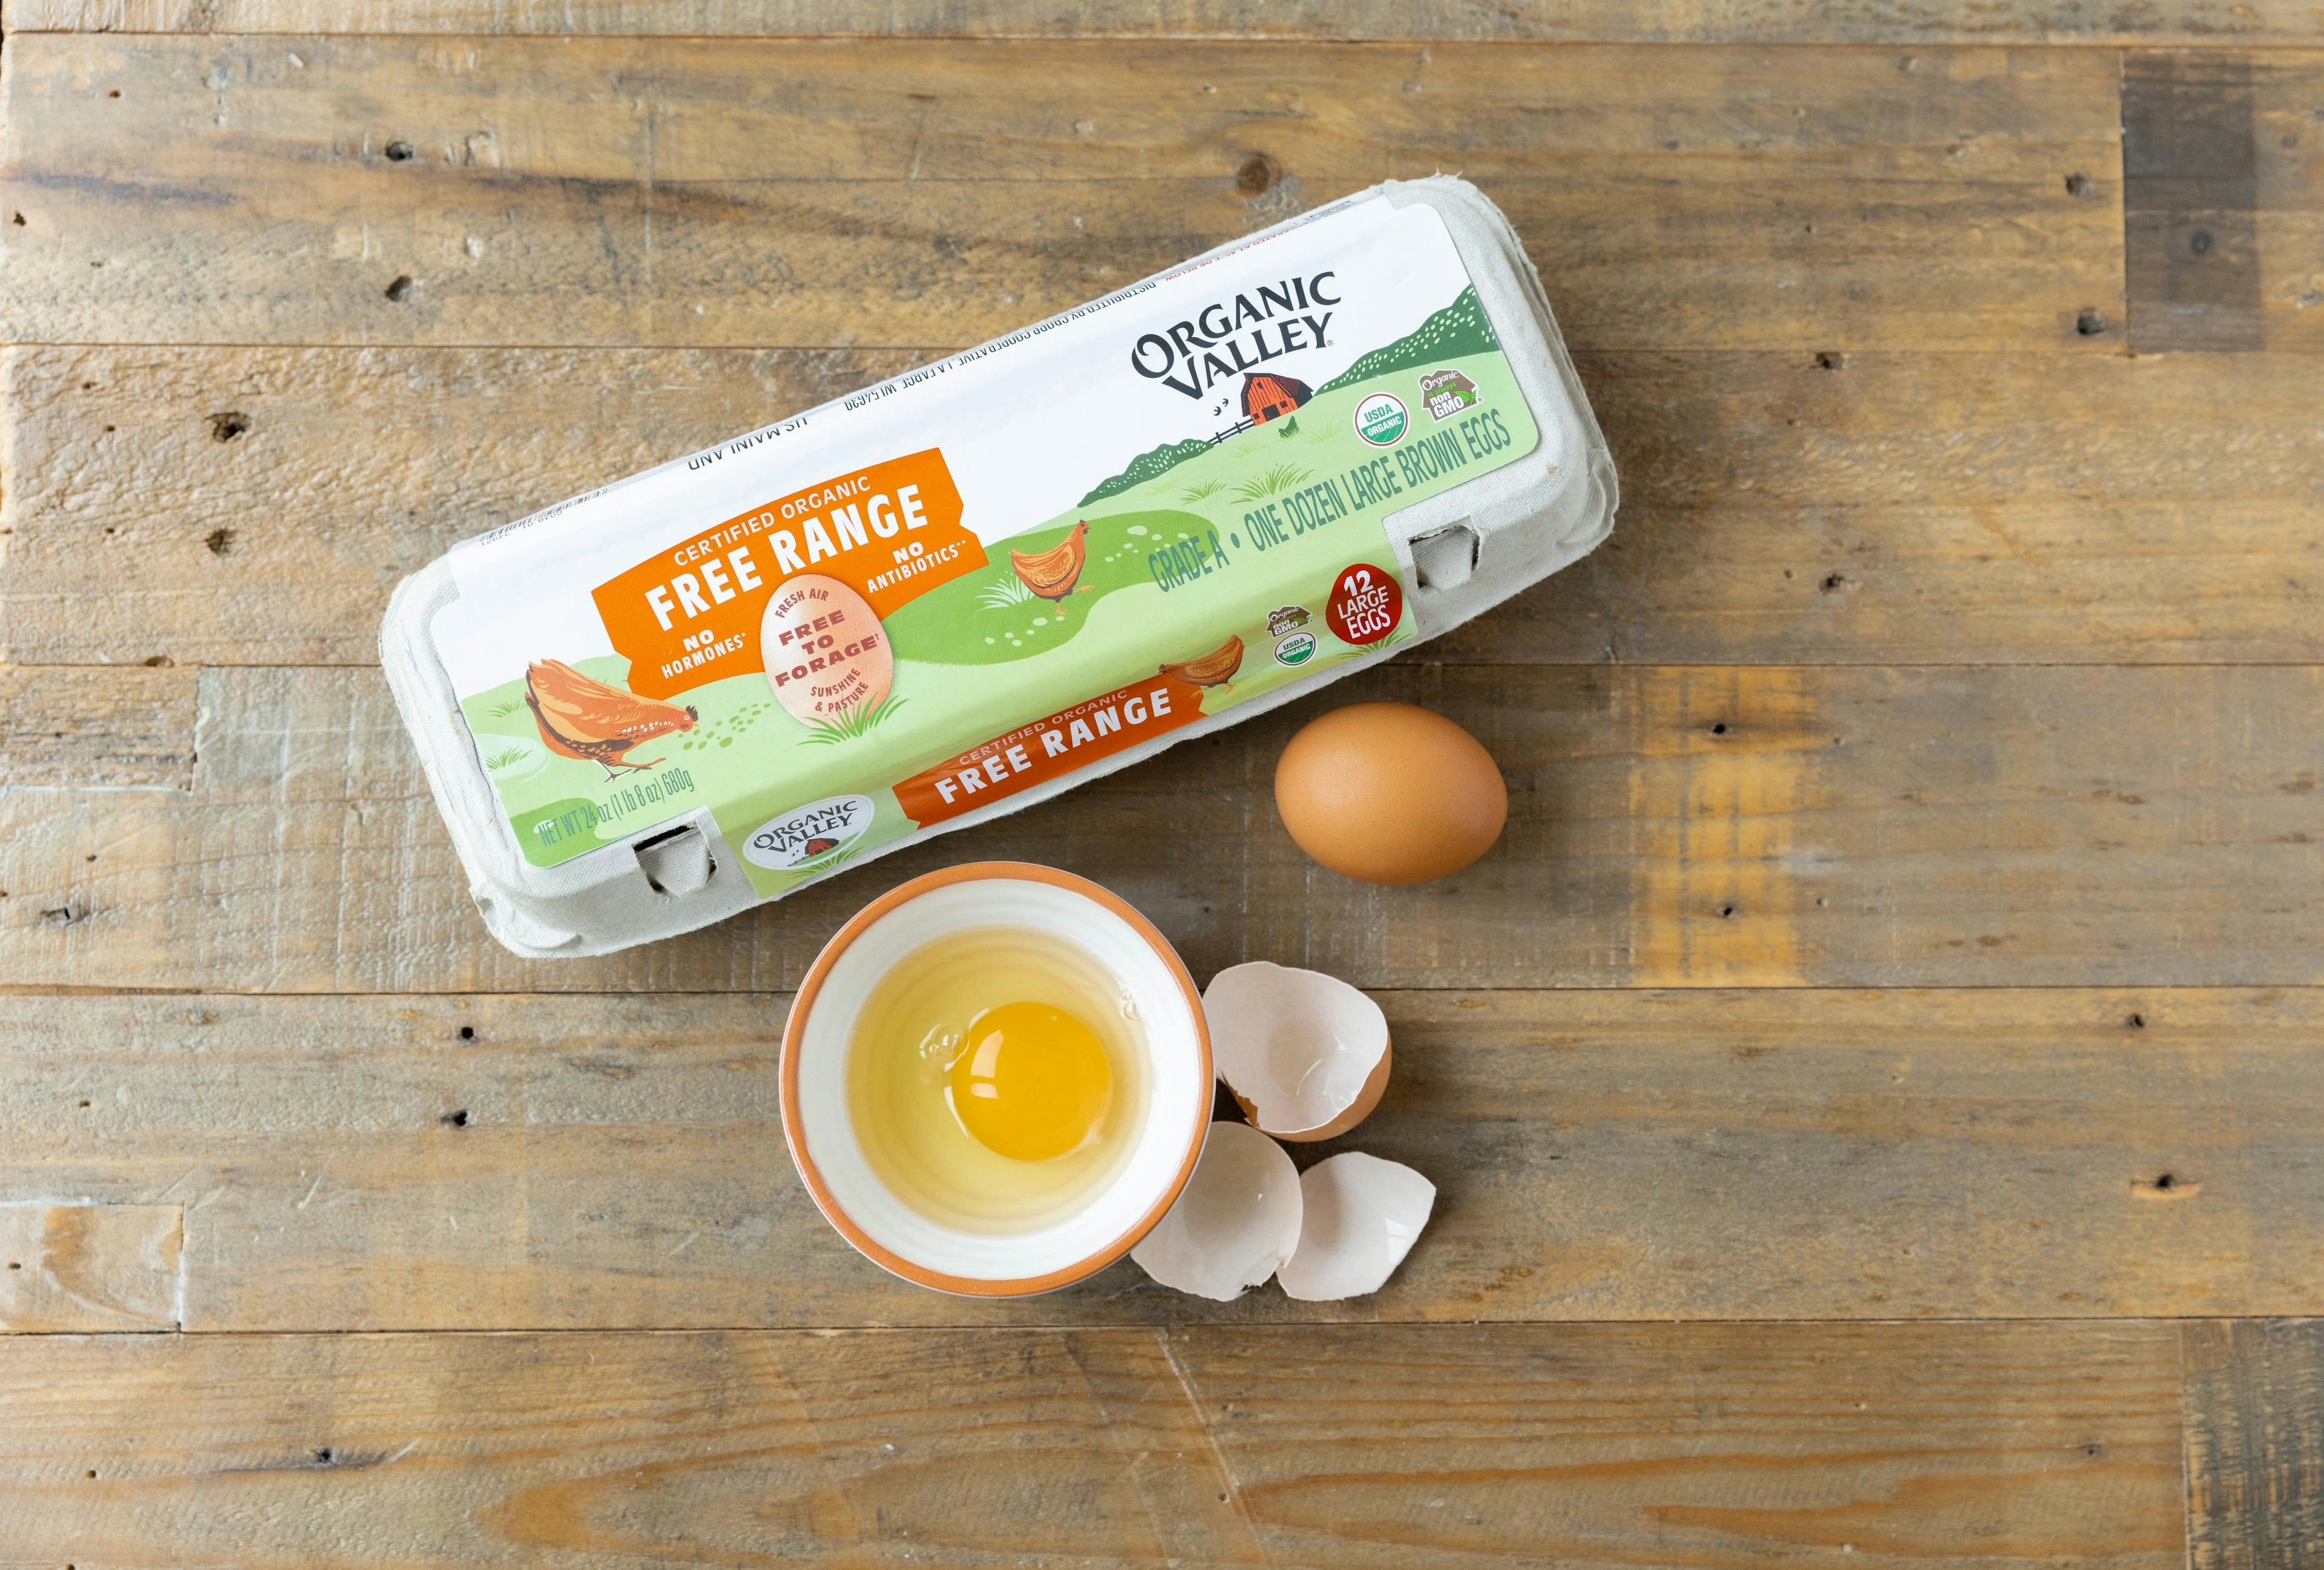 An egg in a dish next to a carton of Organic Valley free range eggs.